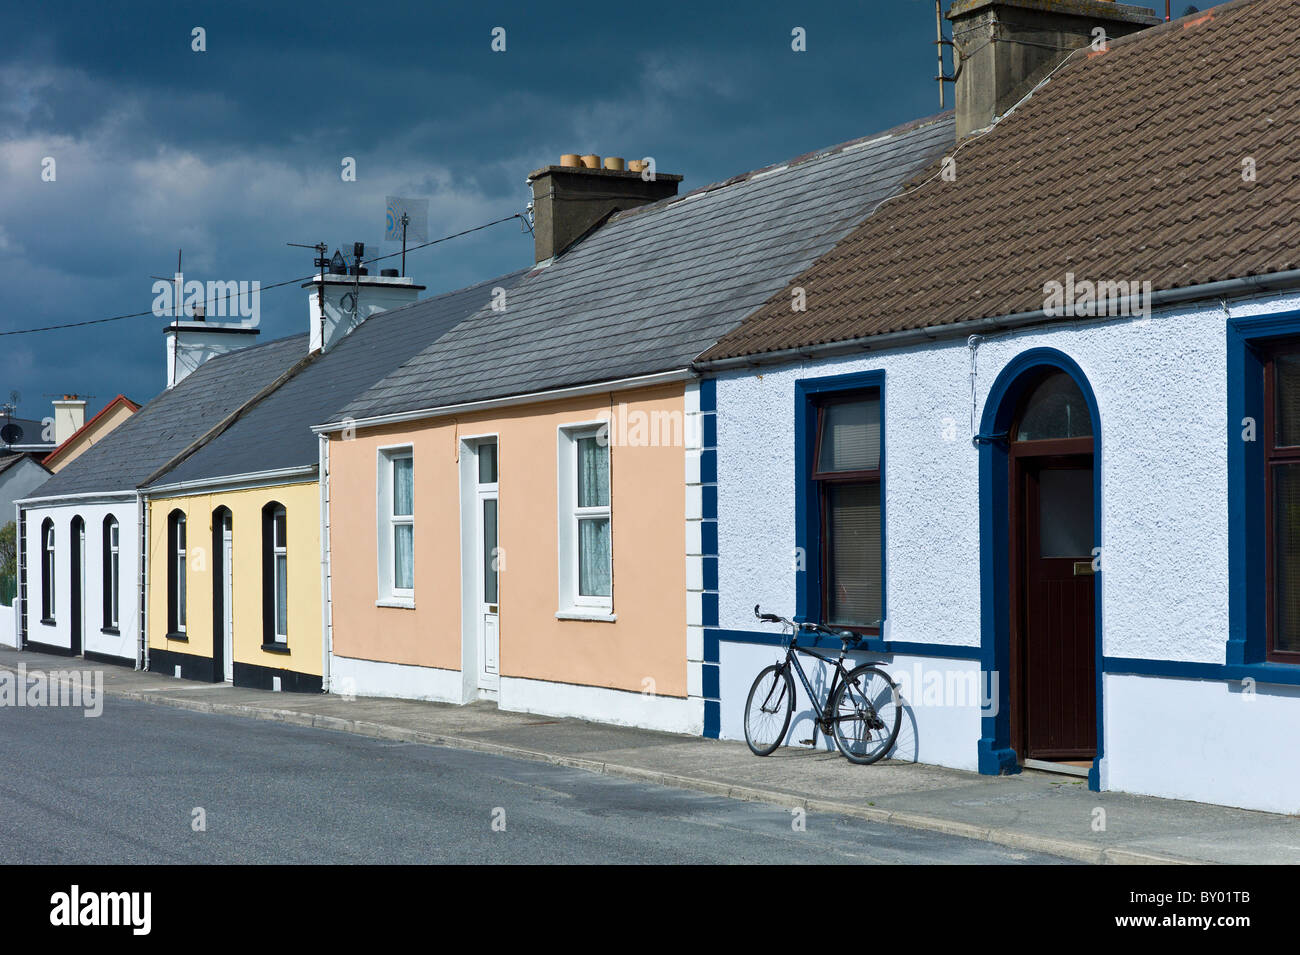 Street scene pastel painted terraced bungalows and bicycle in Railway Road, Kilkee, County Clare, West of Ireland Stock Photo